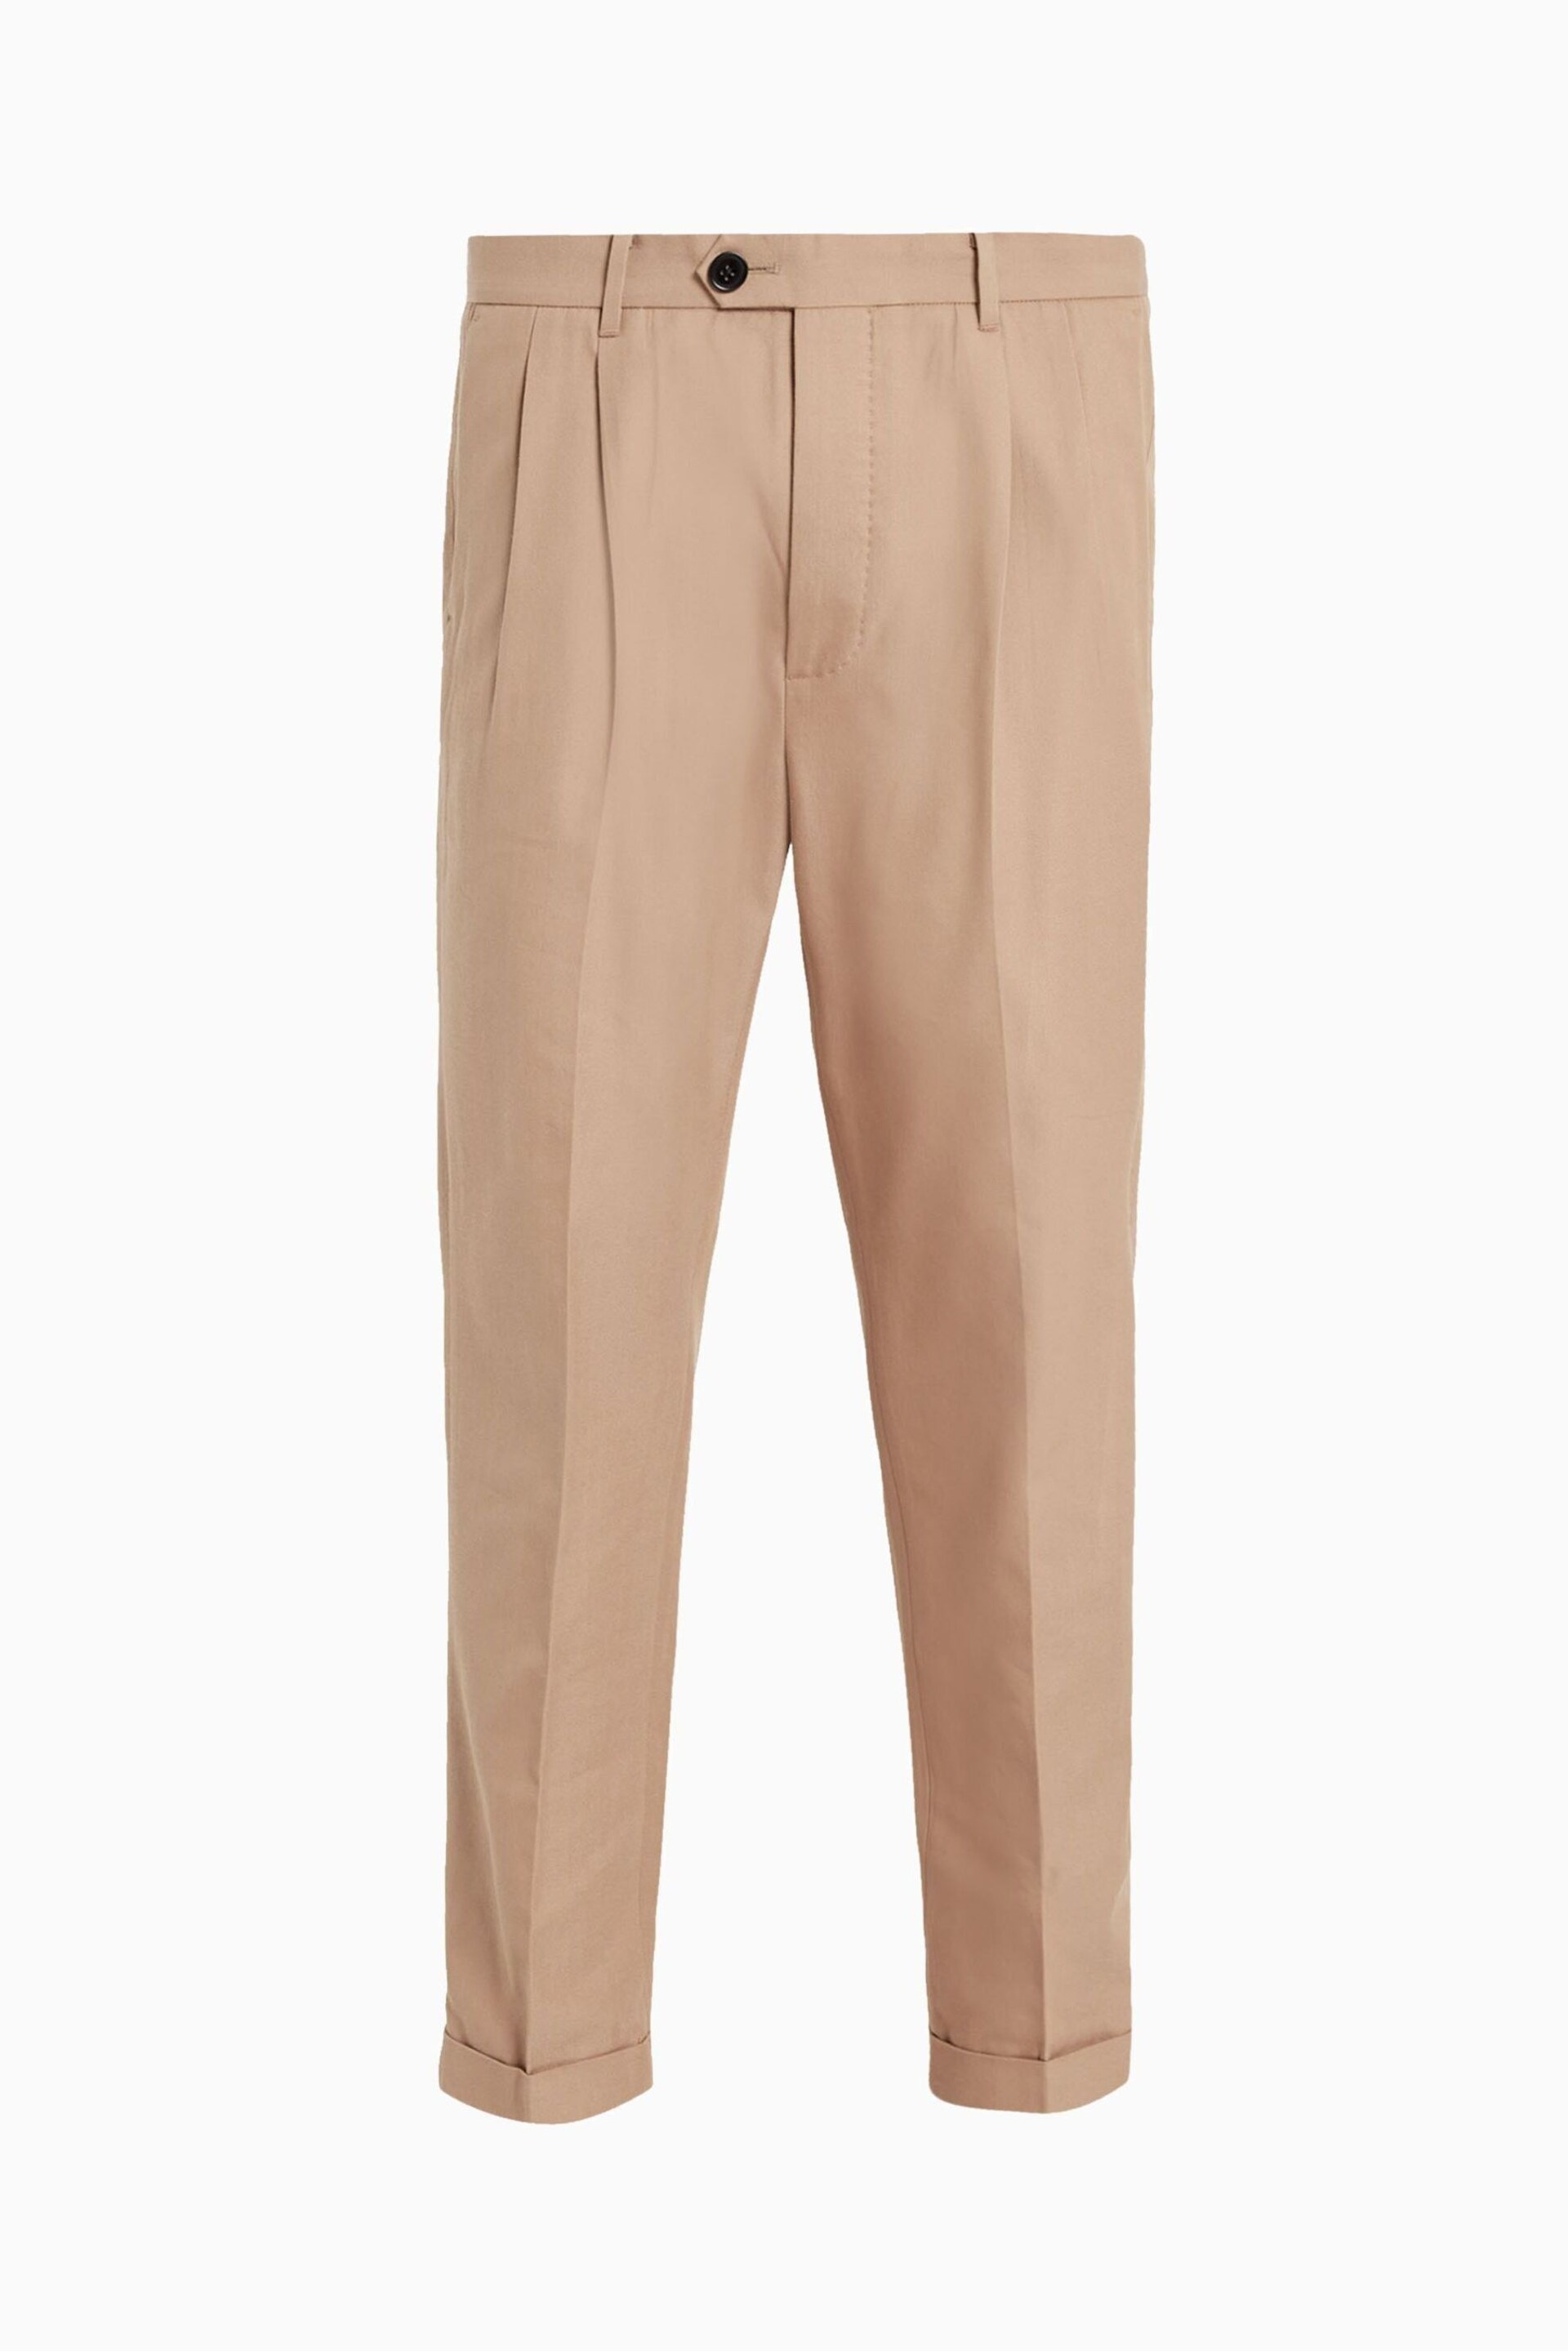 AllSaints Natural Tallis Trousers - Image 6 of 6